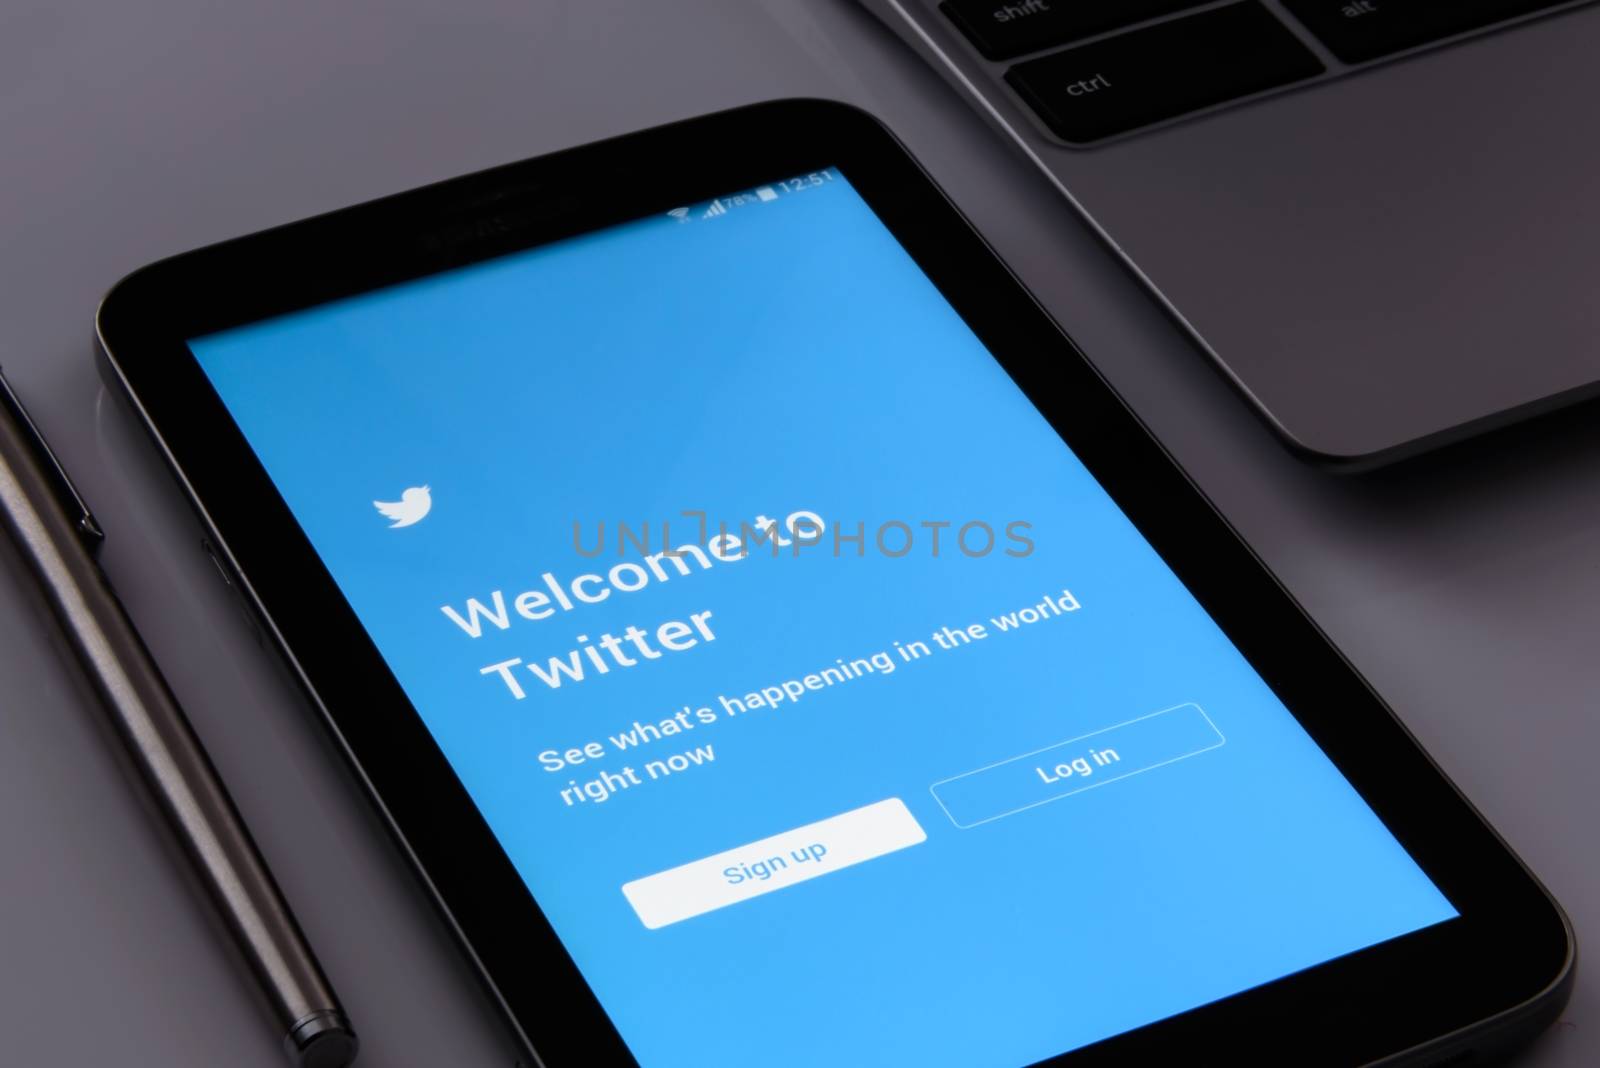 Twitter welcome screen by wdnet_studio